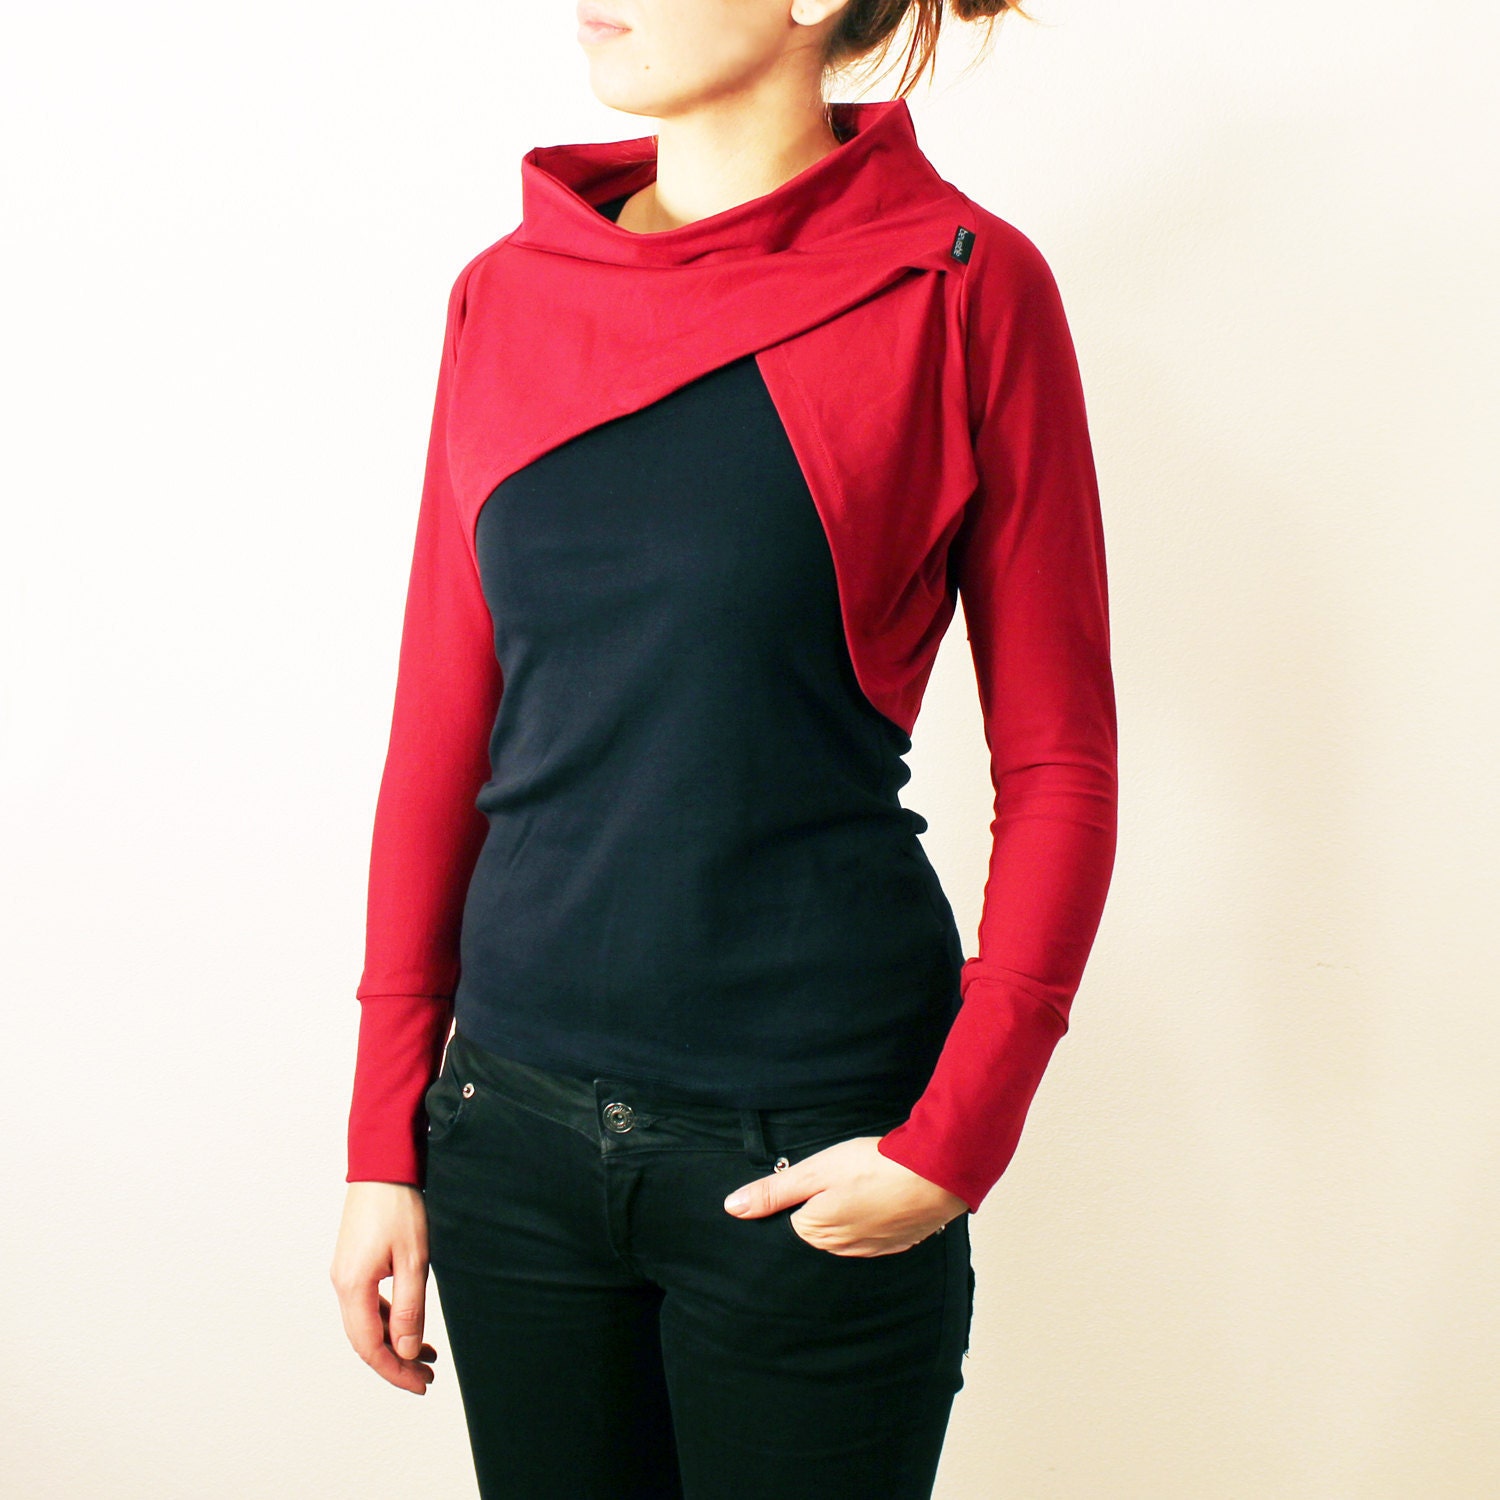 Dark red geometric shrug overlaying effect in front by dressign